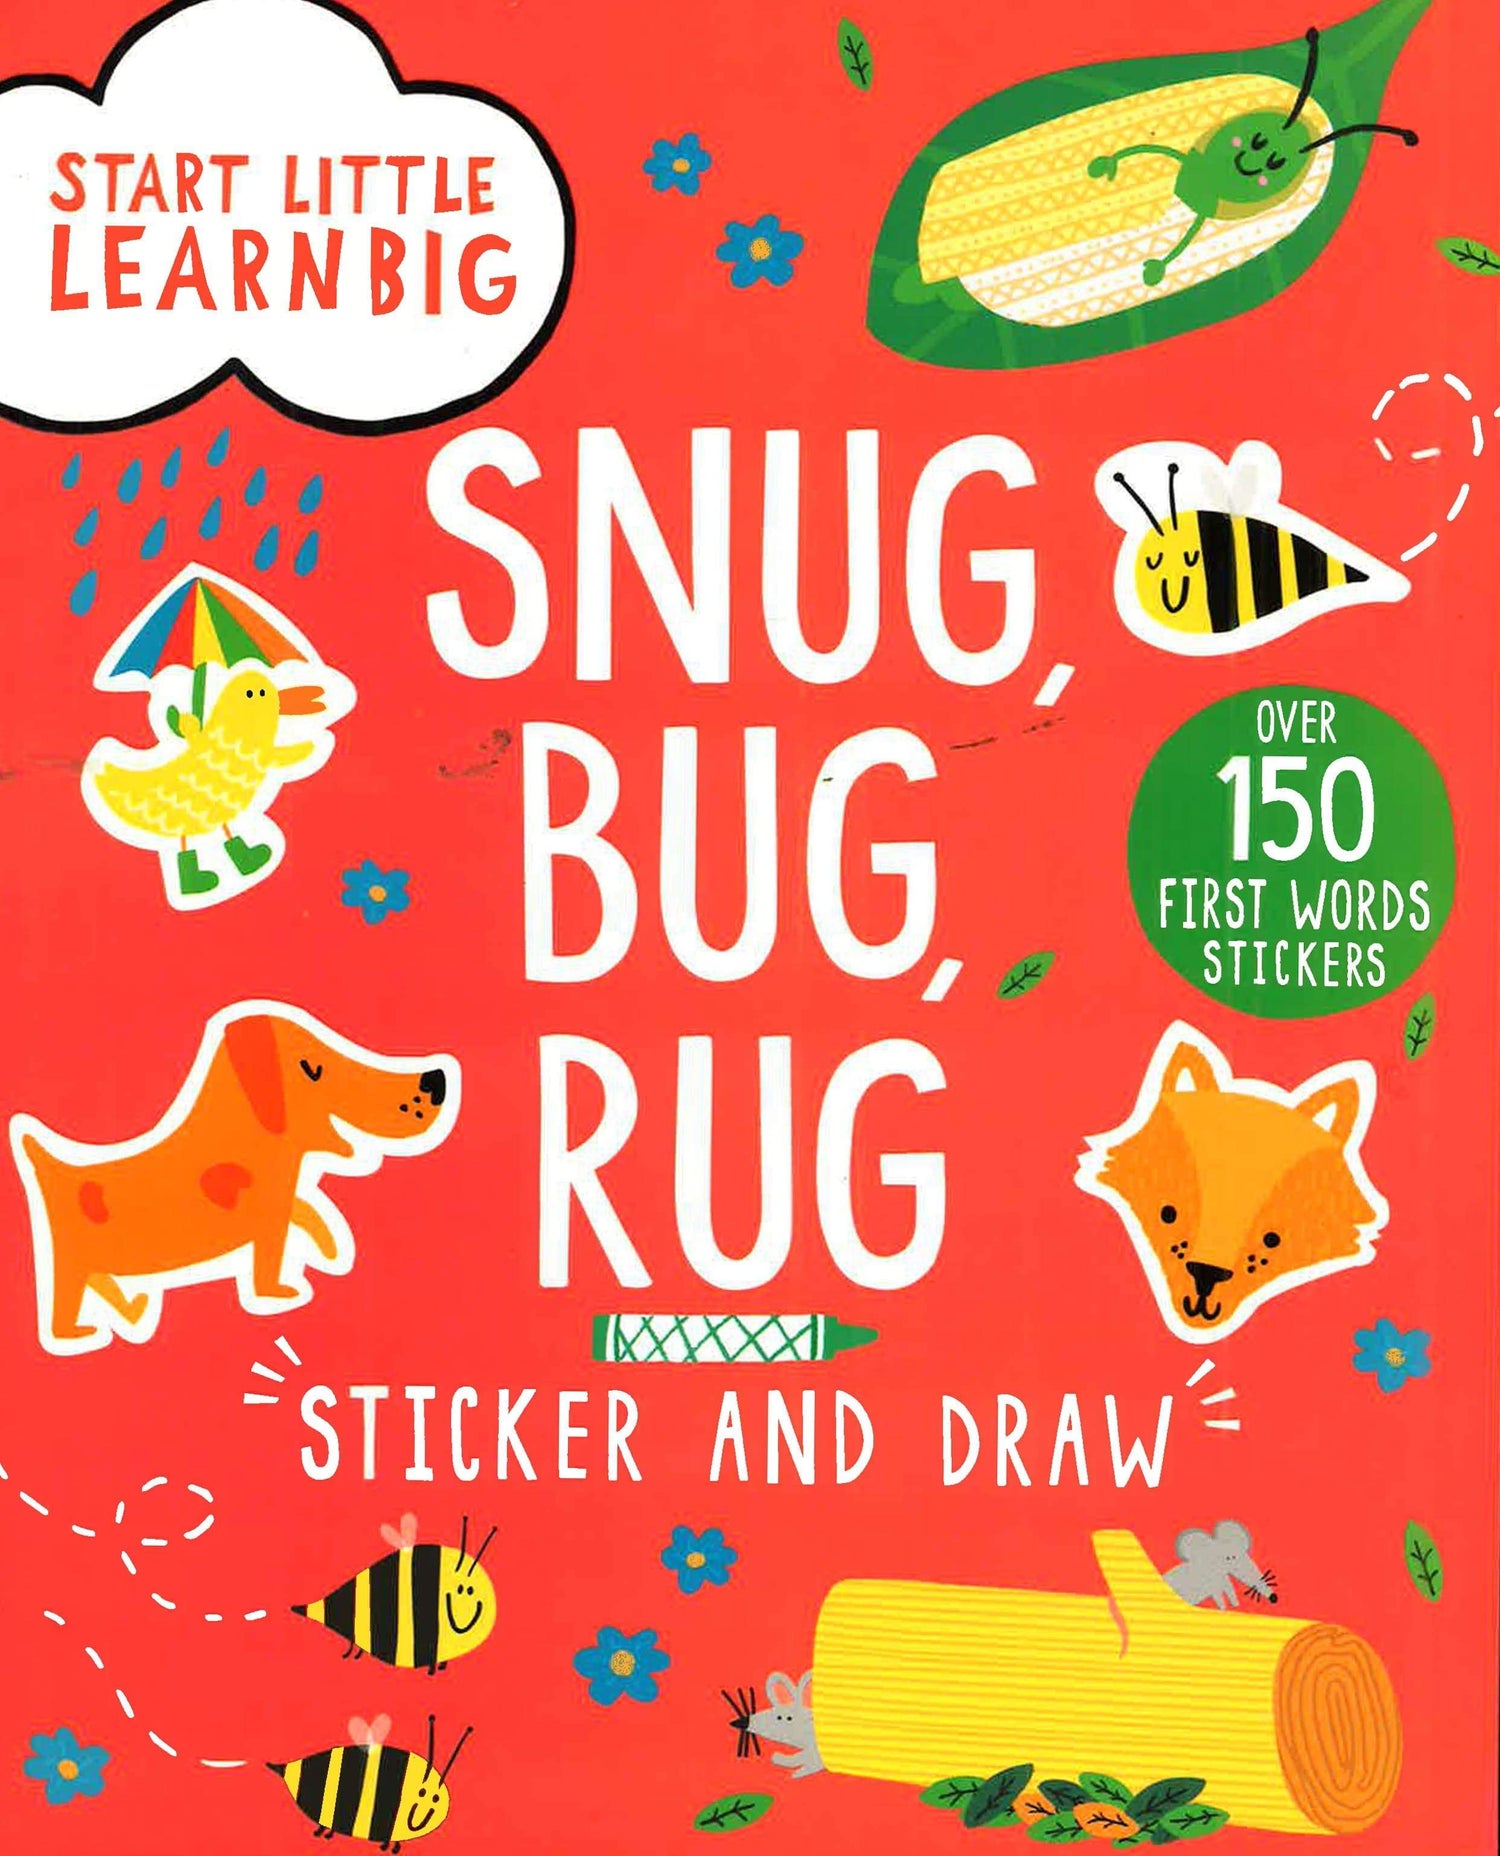 Start Little Learn Big Snug, Bug, Rug Sticker And Draw: Over 150 First Words Stickers